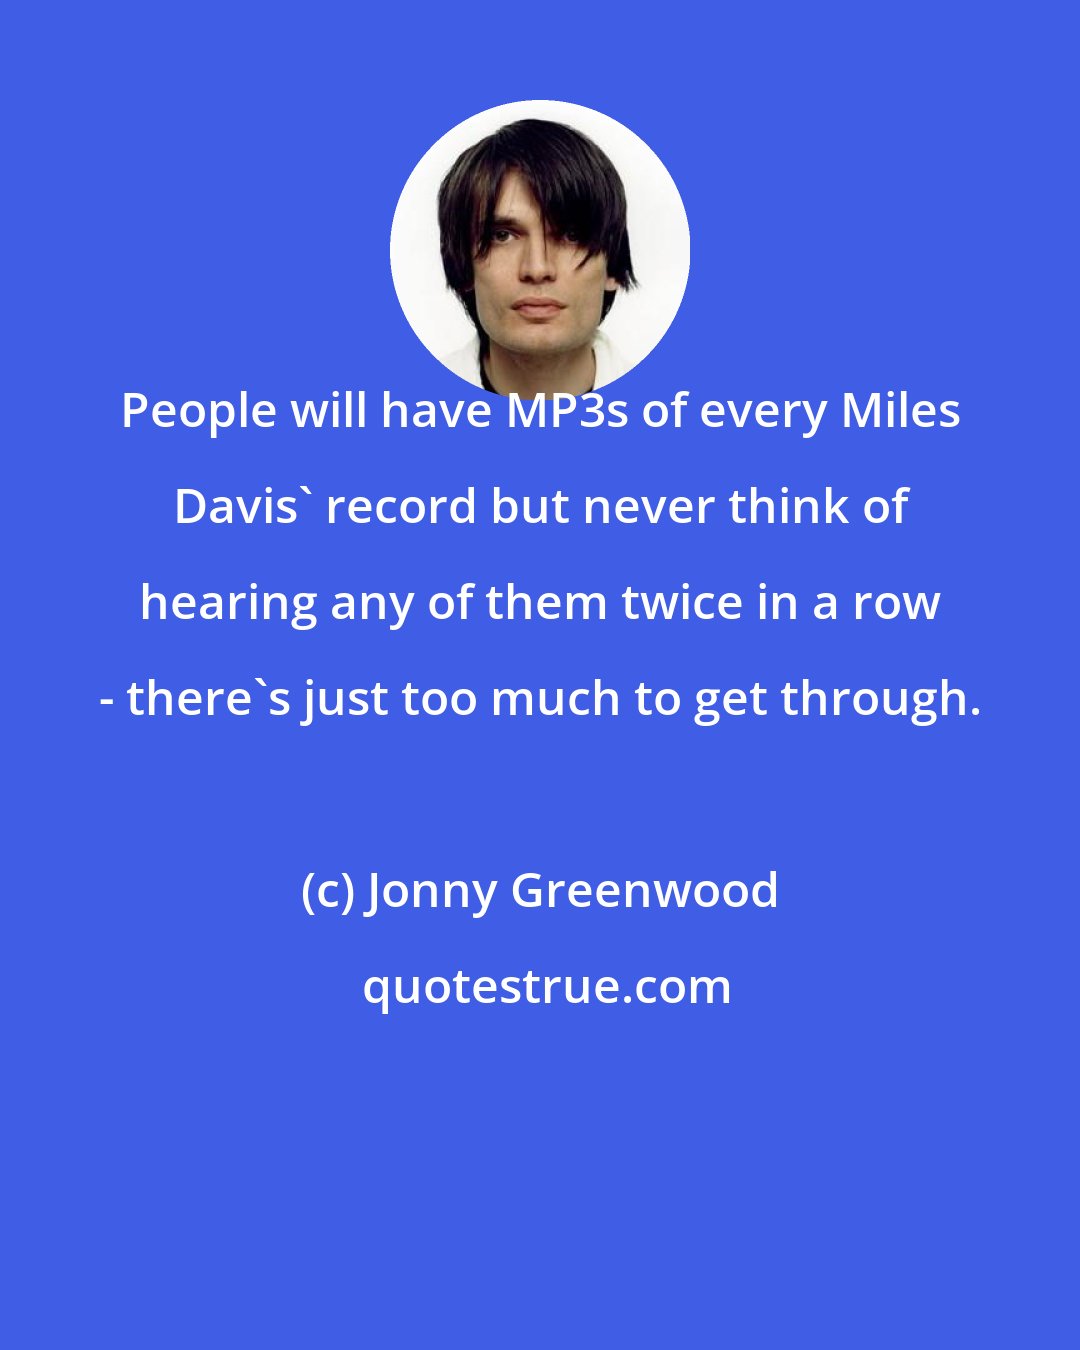 Jonny Greenwood: People will have MP3s of every Miles Davis' record but never think of hearing any of them twice in a row - there's just too much to get through.